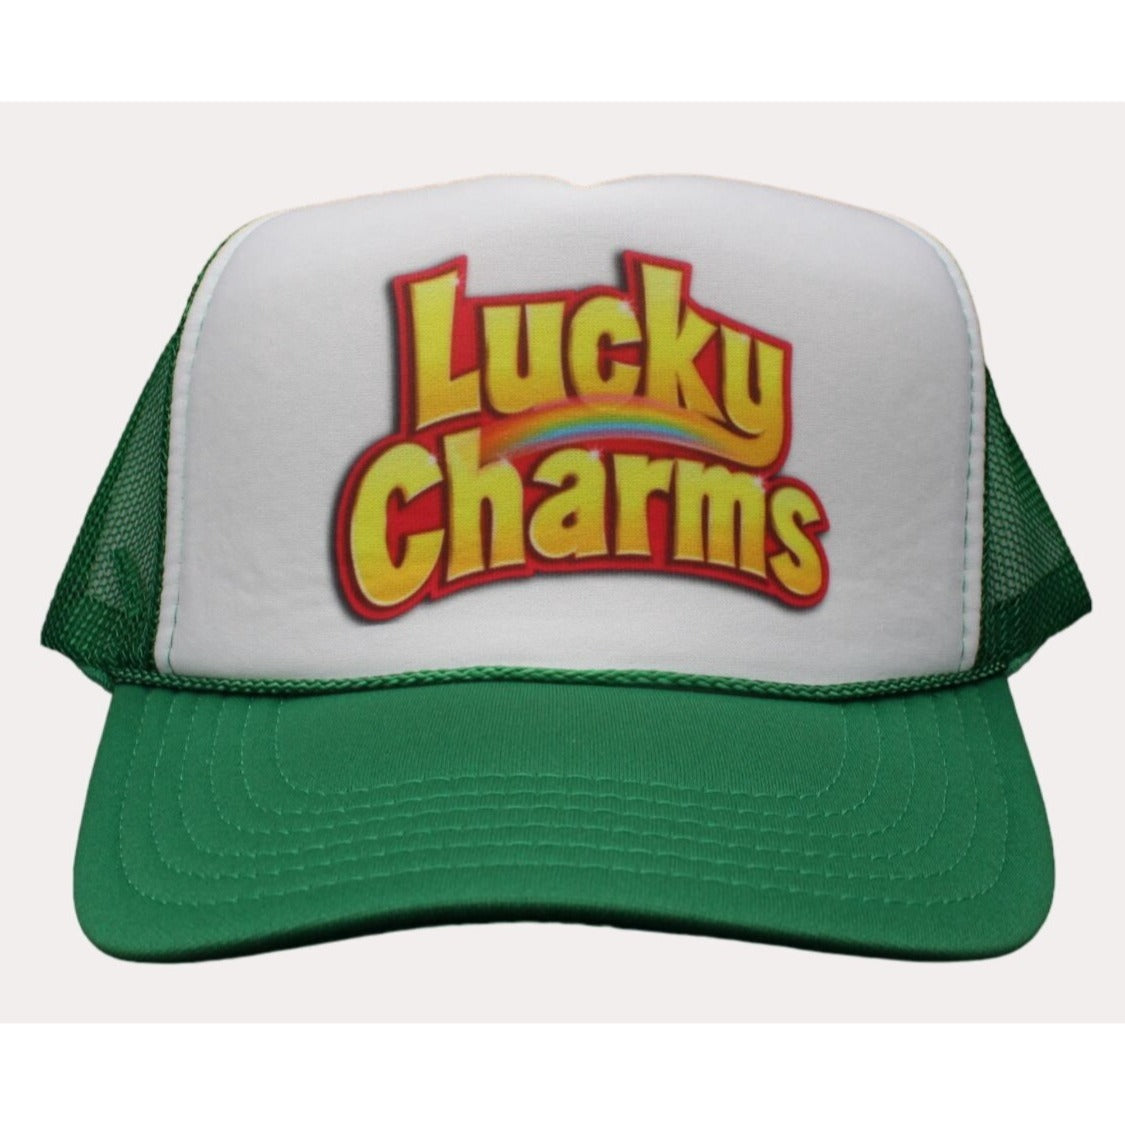 LUCKY CHARMS HAT